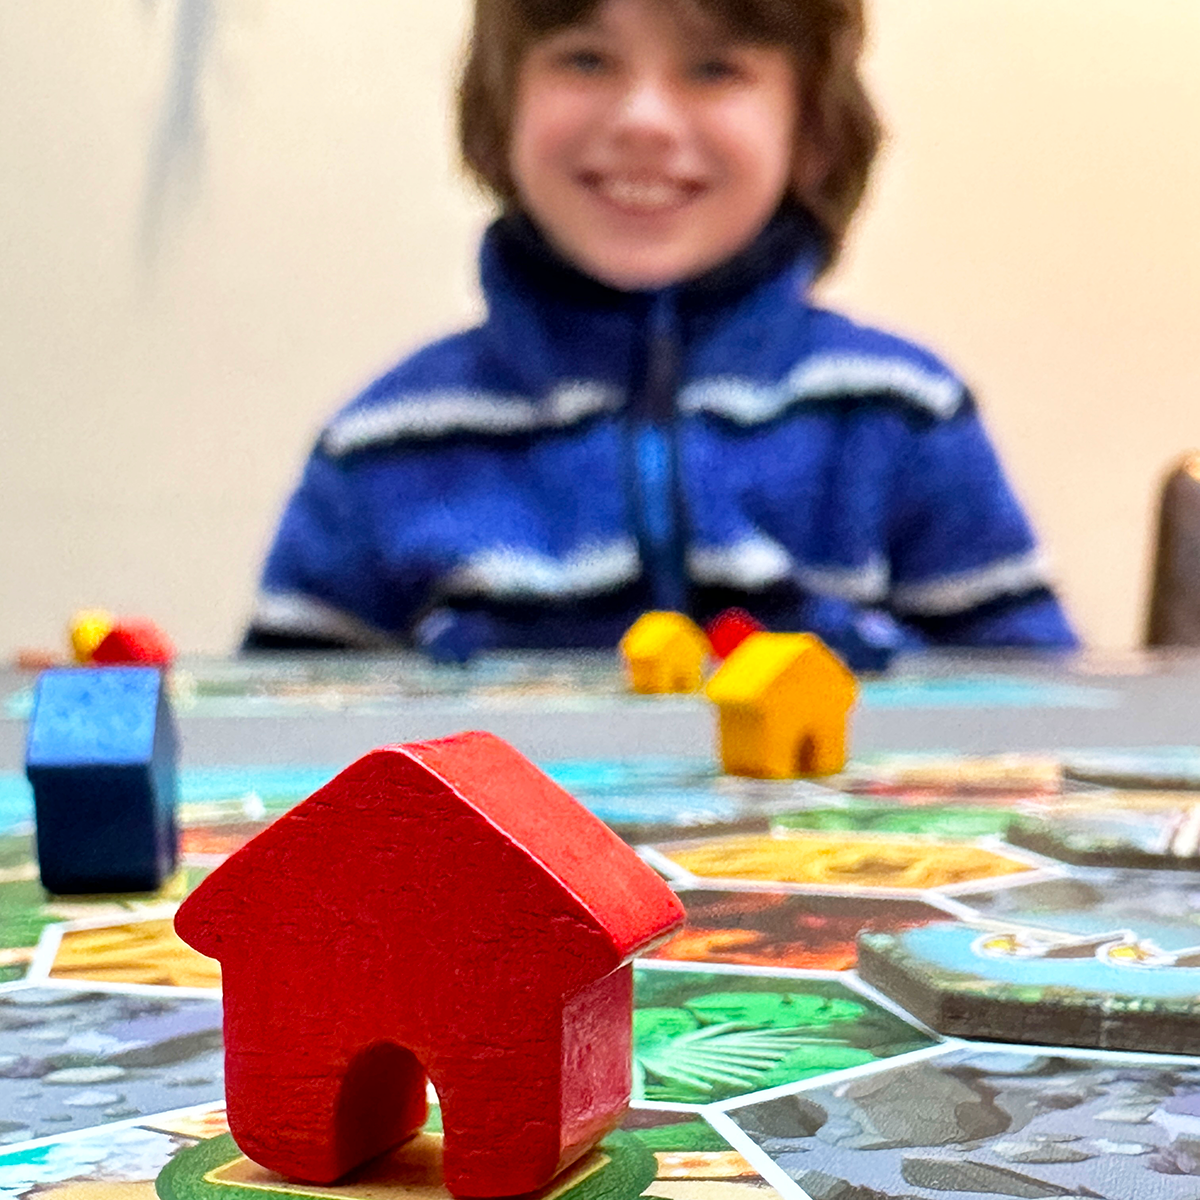 Tucana Builders Board Game Review playing with Max